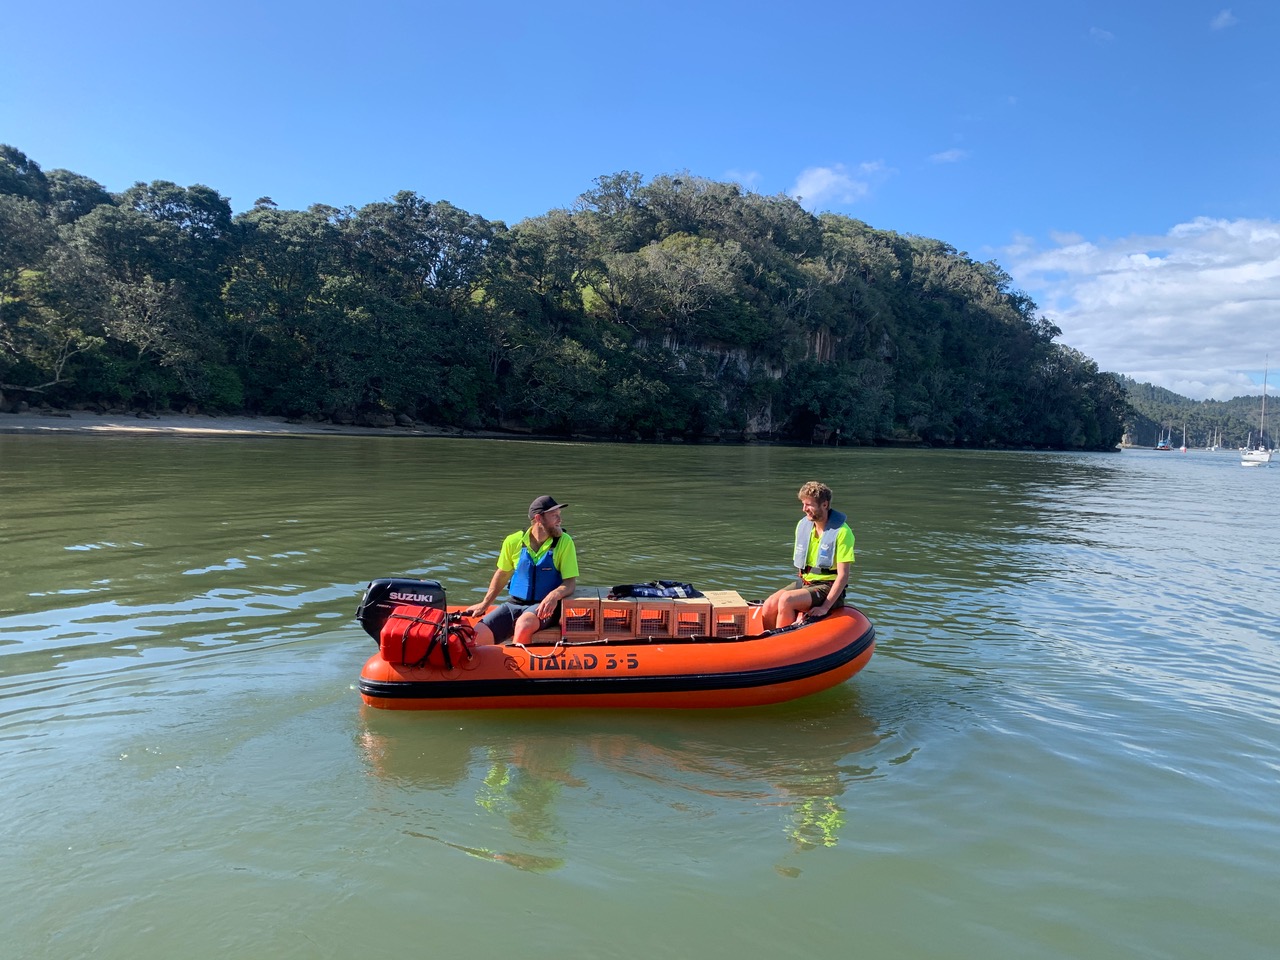 Two men in an inflatable dingy on the water in a bay